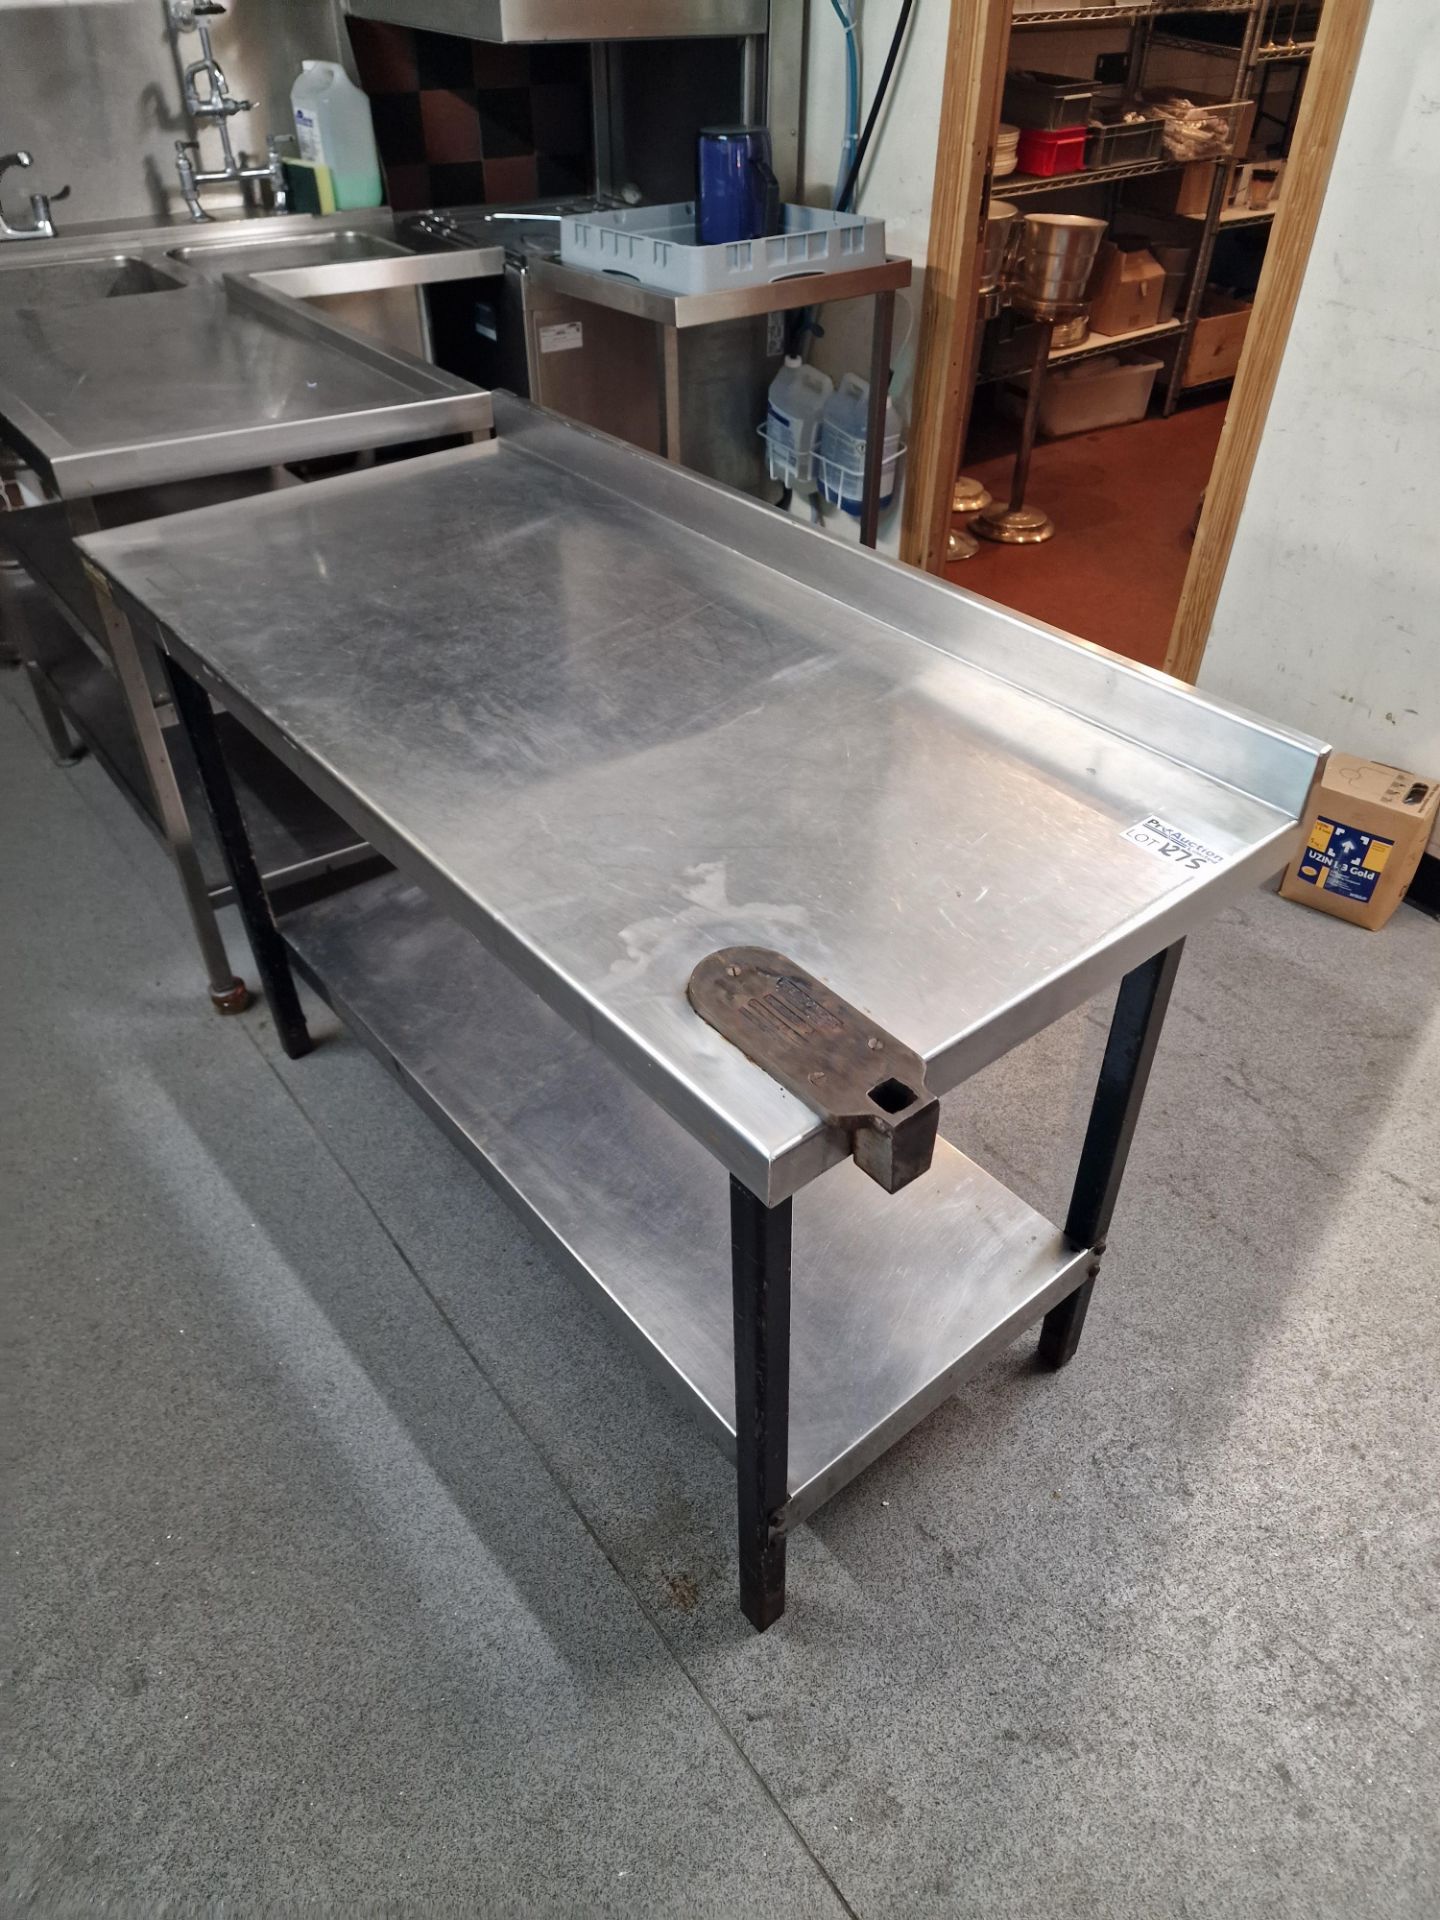 Stainless Steel Preparation Table With Upstand Undershelf And Can Opener Slot 130 x 62 x 84cm